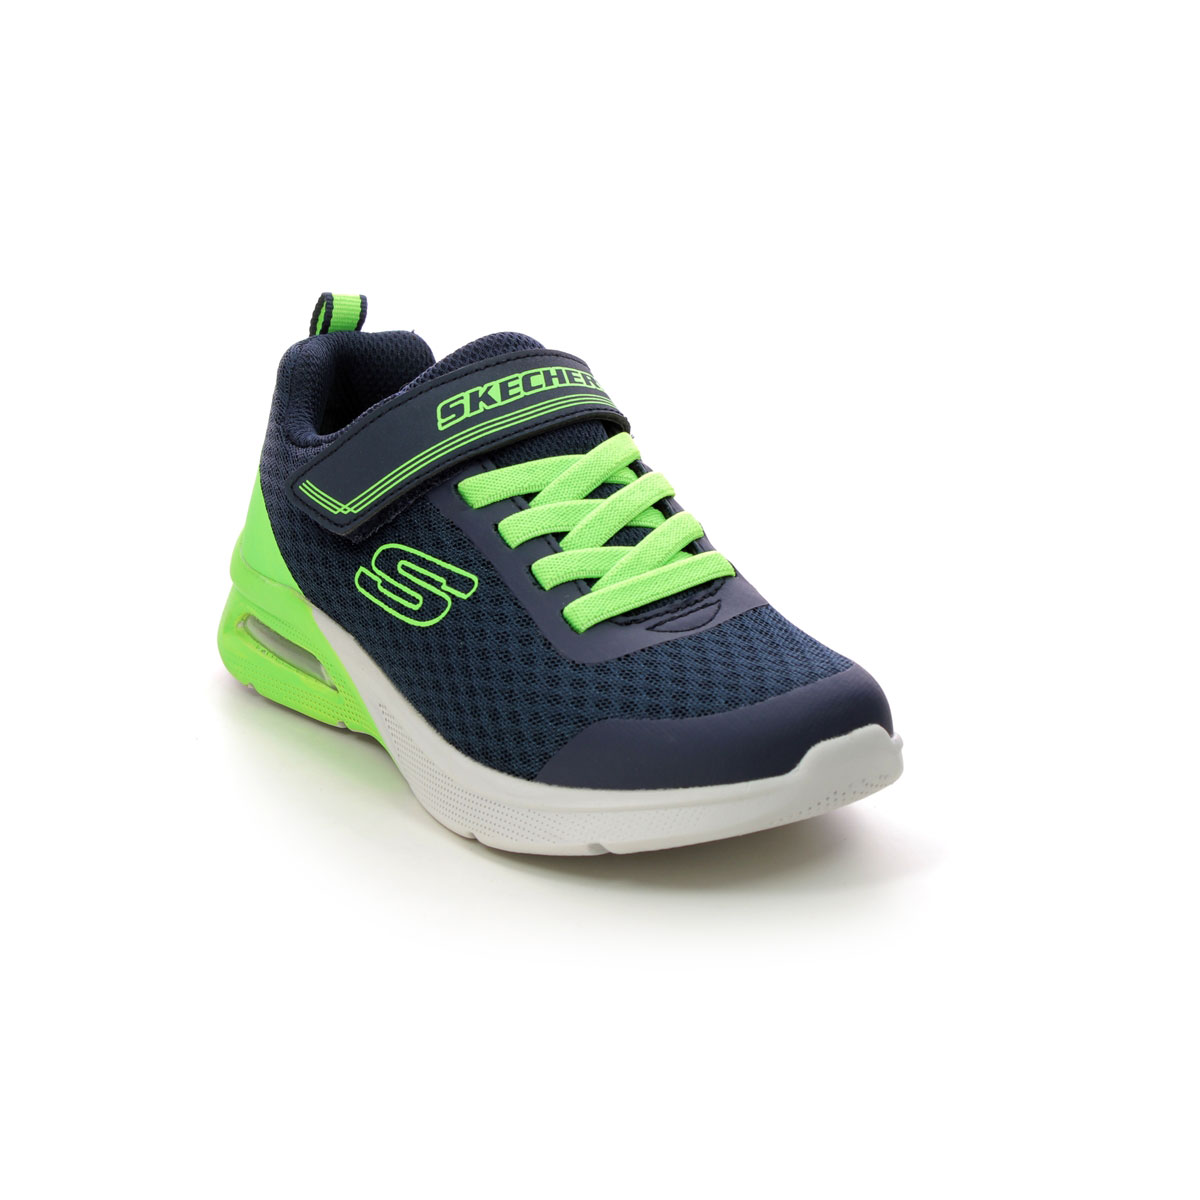 Skechers Microspec Max Navy Lime Kids Trainers 403773L In Size 34 In Plain Navy Lime For kids